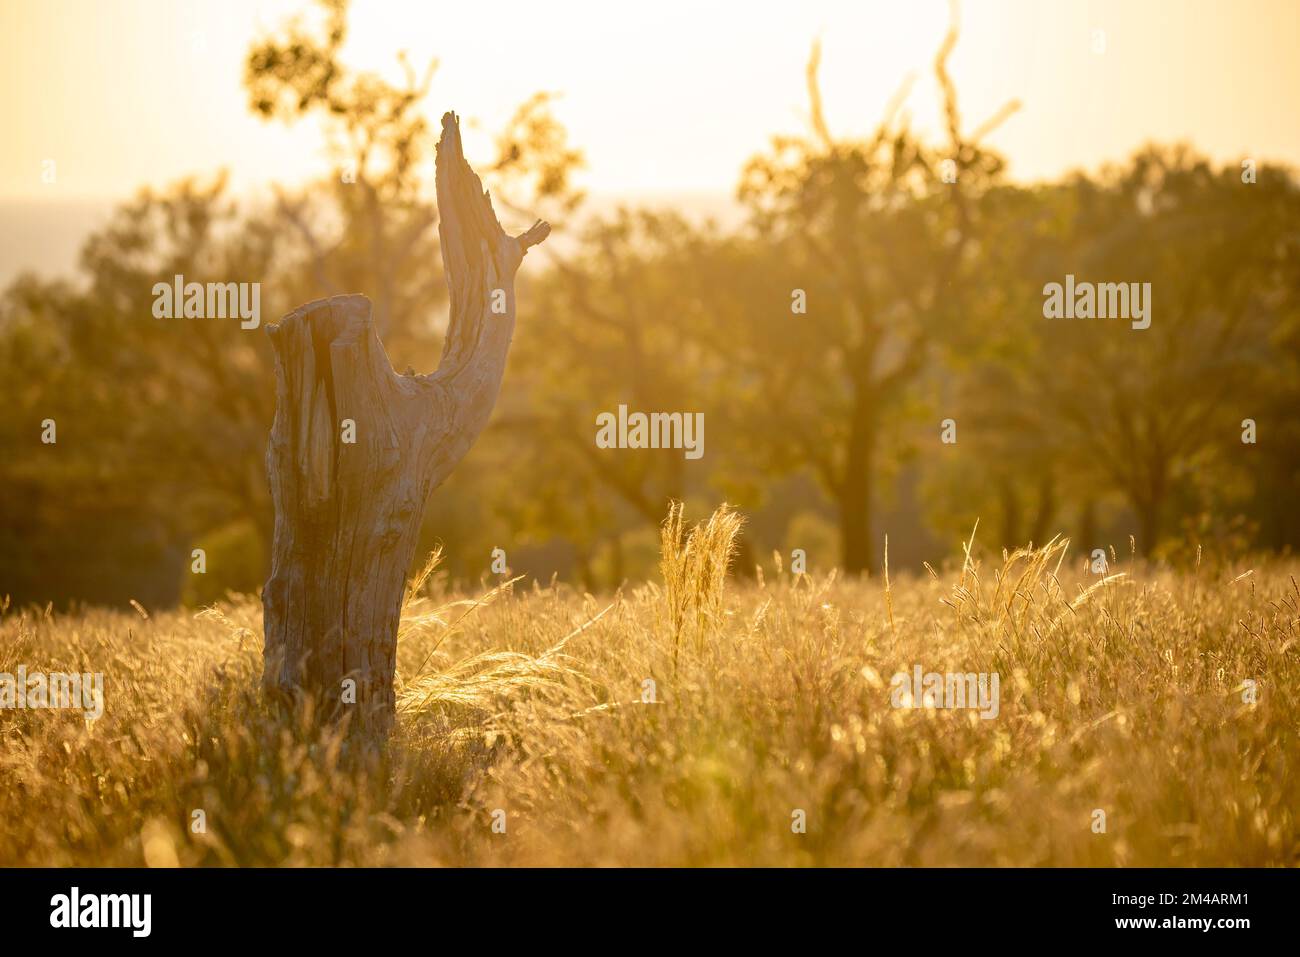 The stump of a dead Western Bloodwood tree (Corymbia terminalis) stands among the native Mitchell Grass (Astrebla lappacea) in golden morning light Stock Photo